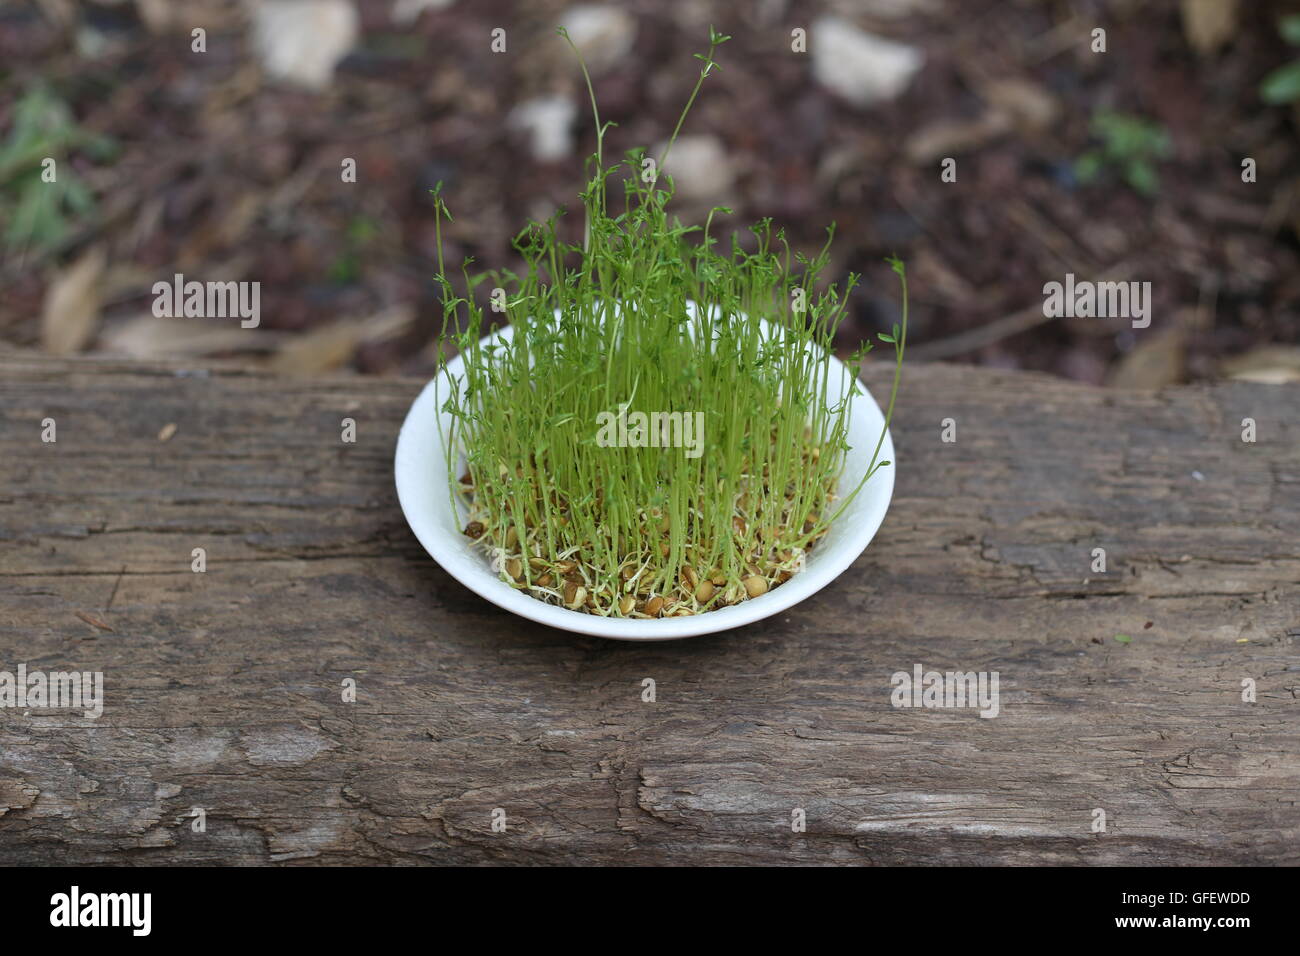 Lentils Sprouts in a Plate.  Germinated lentils. Home made lentils sprouts in a white dish on wooden railway sleepers. Stock Photo